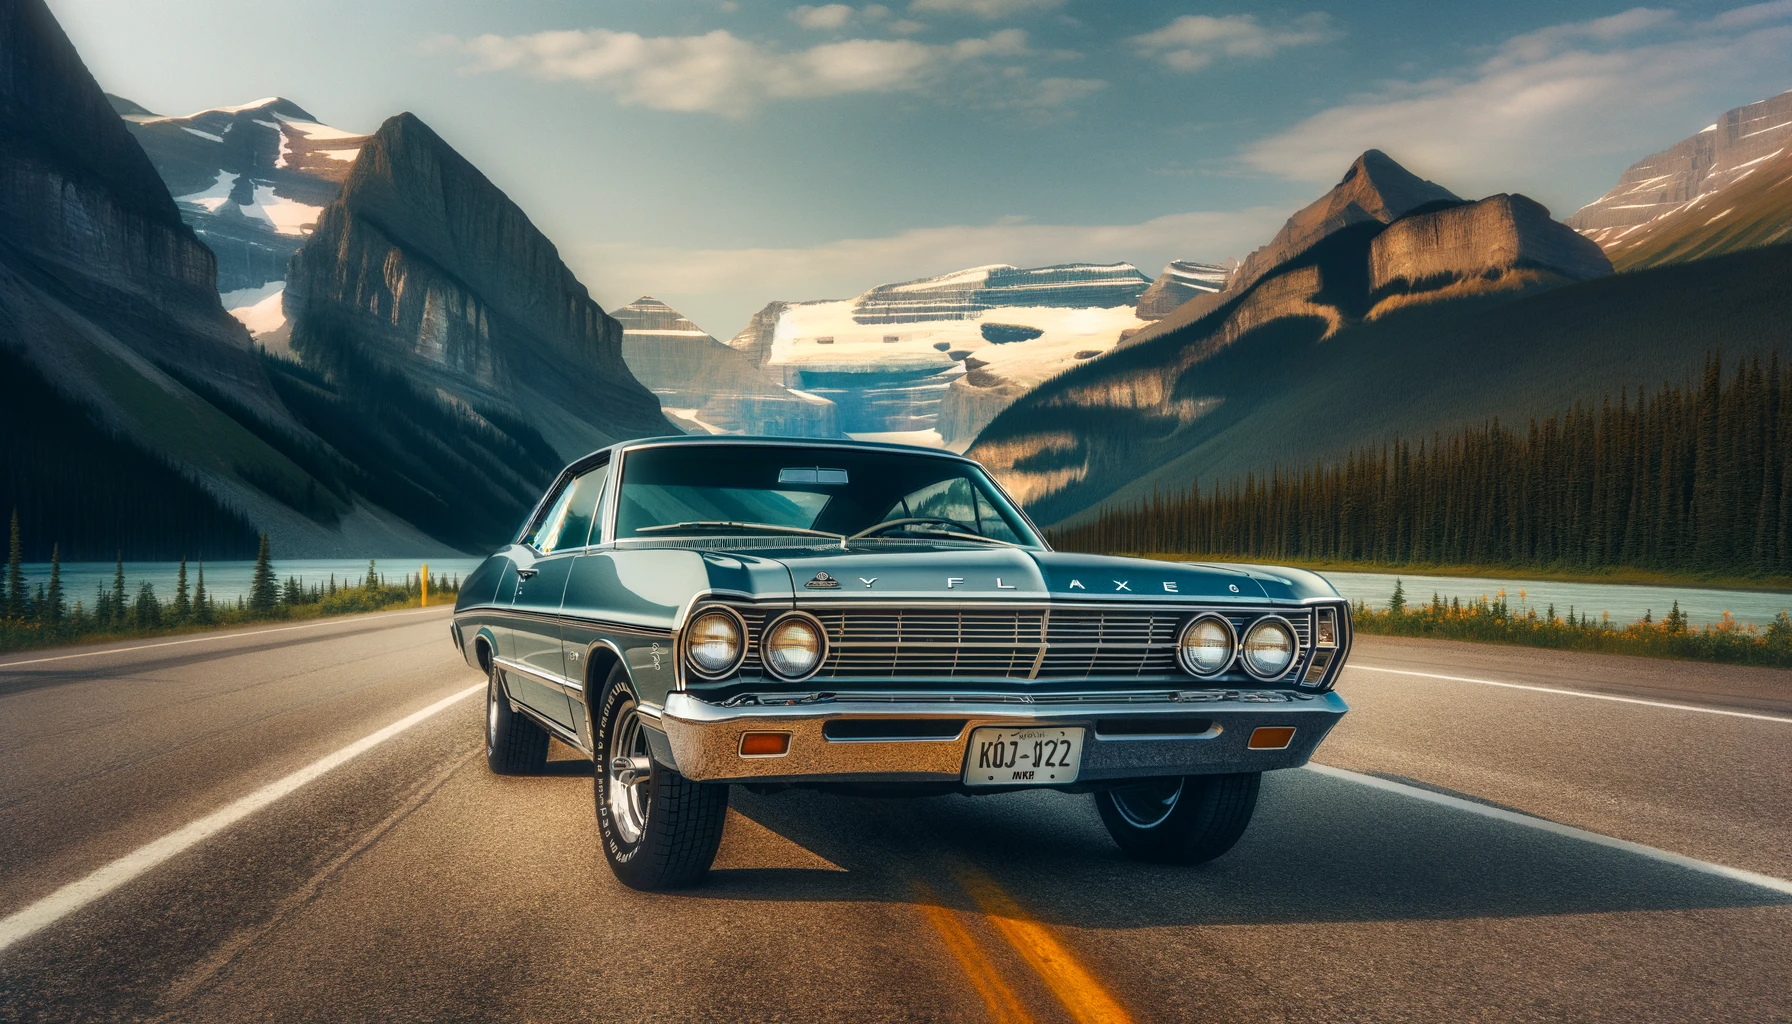 The 1968 Ford Galaxie 500 Fastback set against the backdrop of Canadas